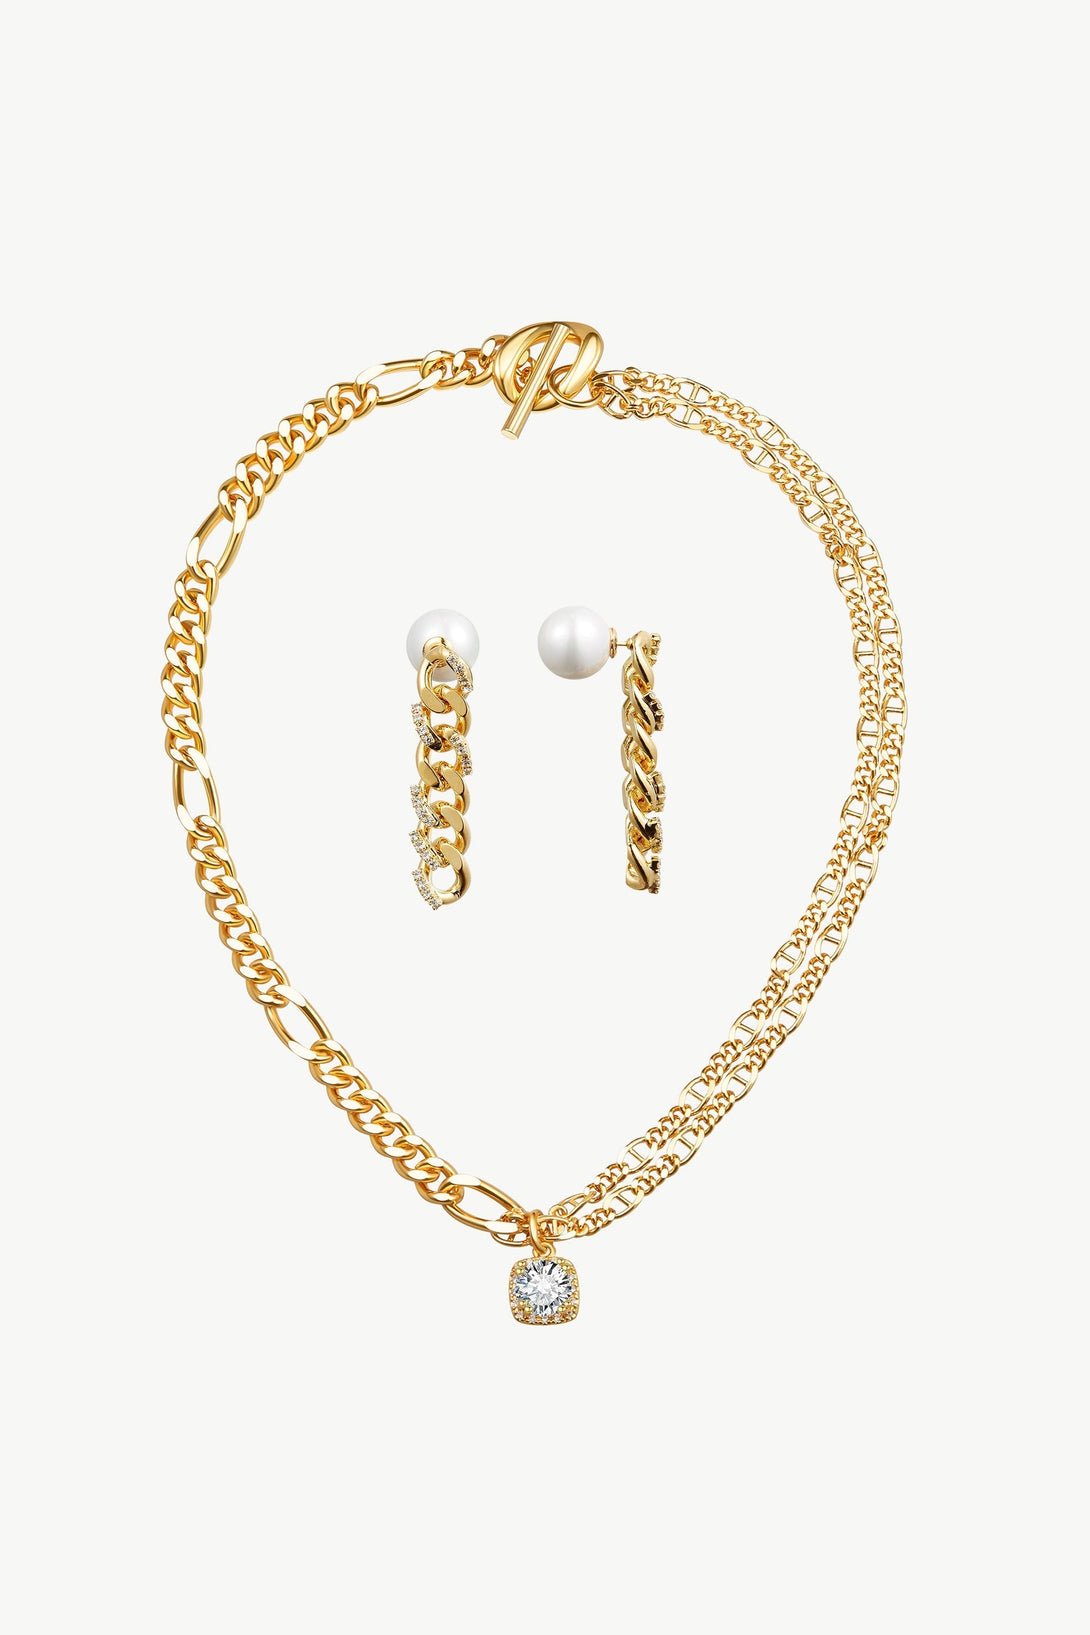 Statement Glittering Necklace and Earrings Set - Classicharms